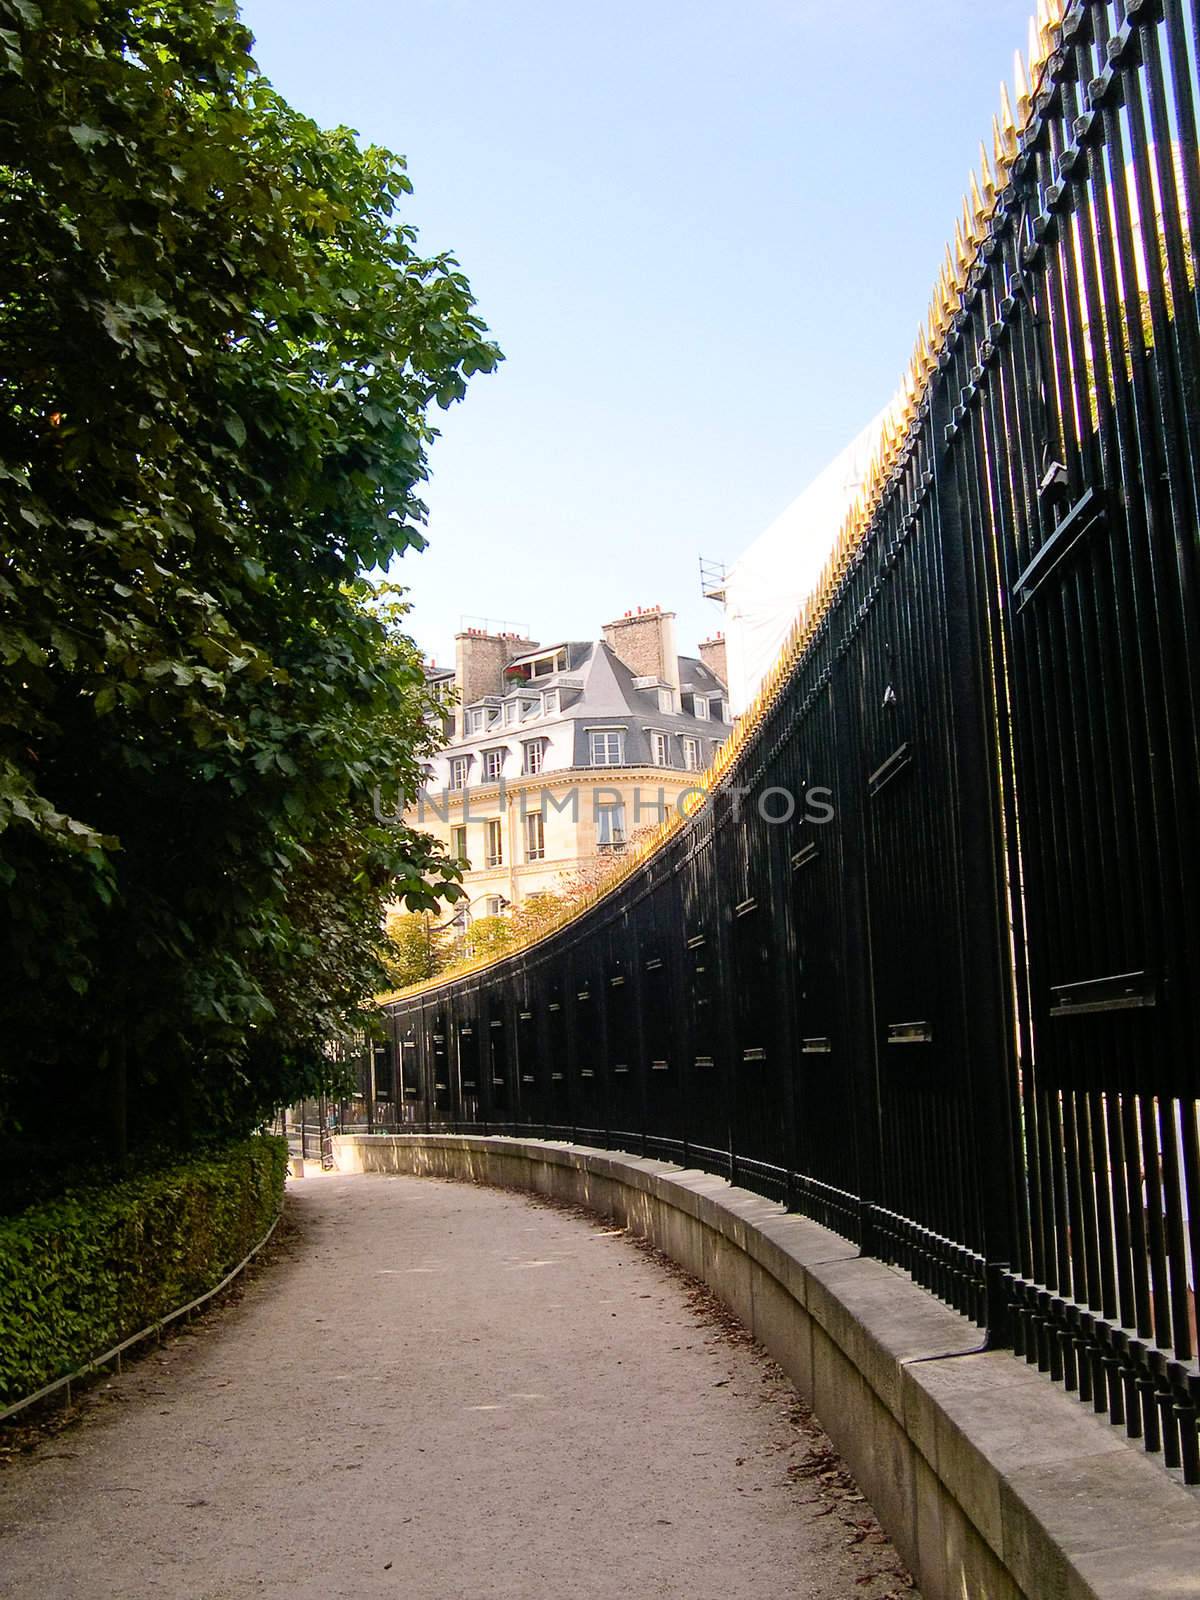 Luxembourg Gardens Path by jaimepharr